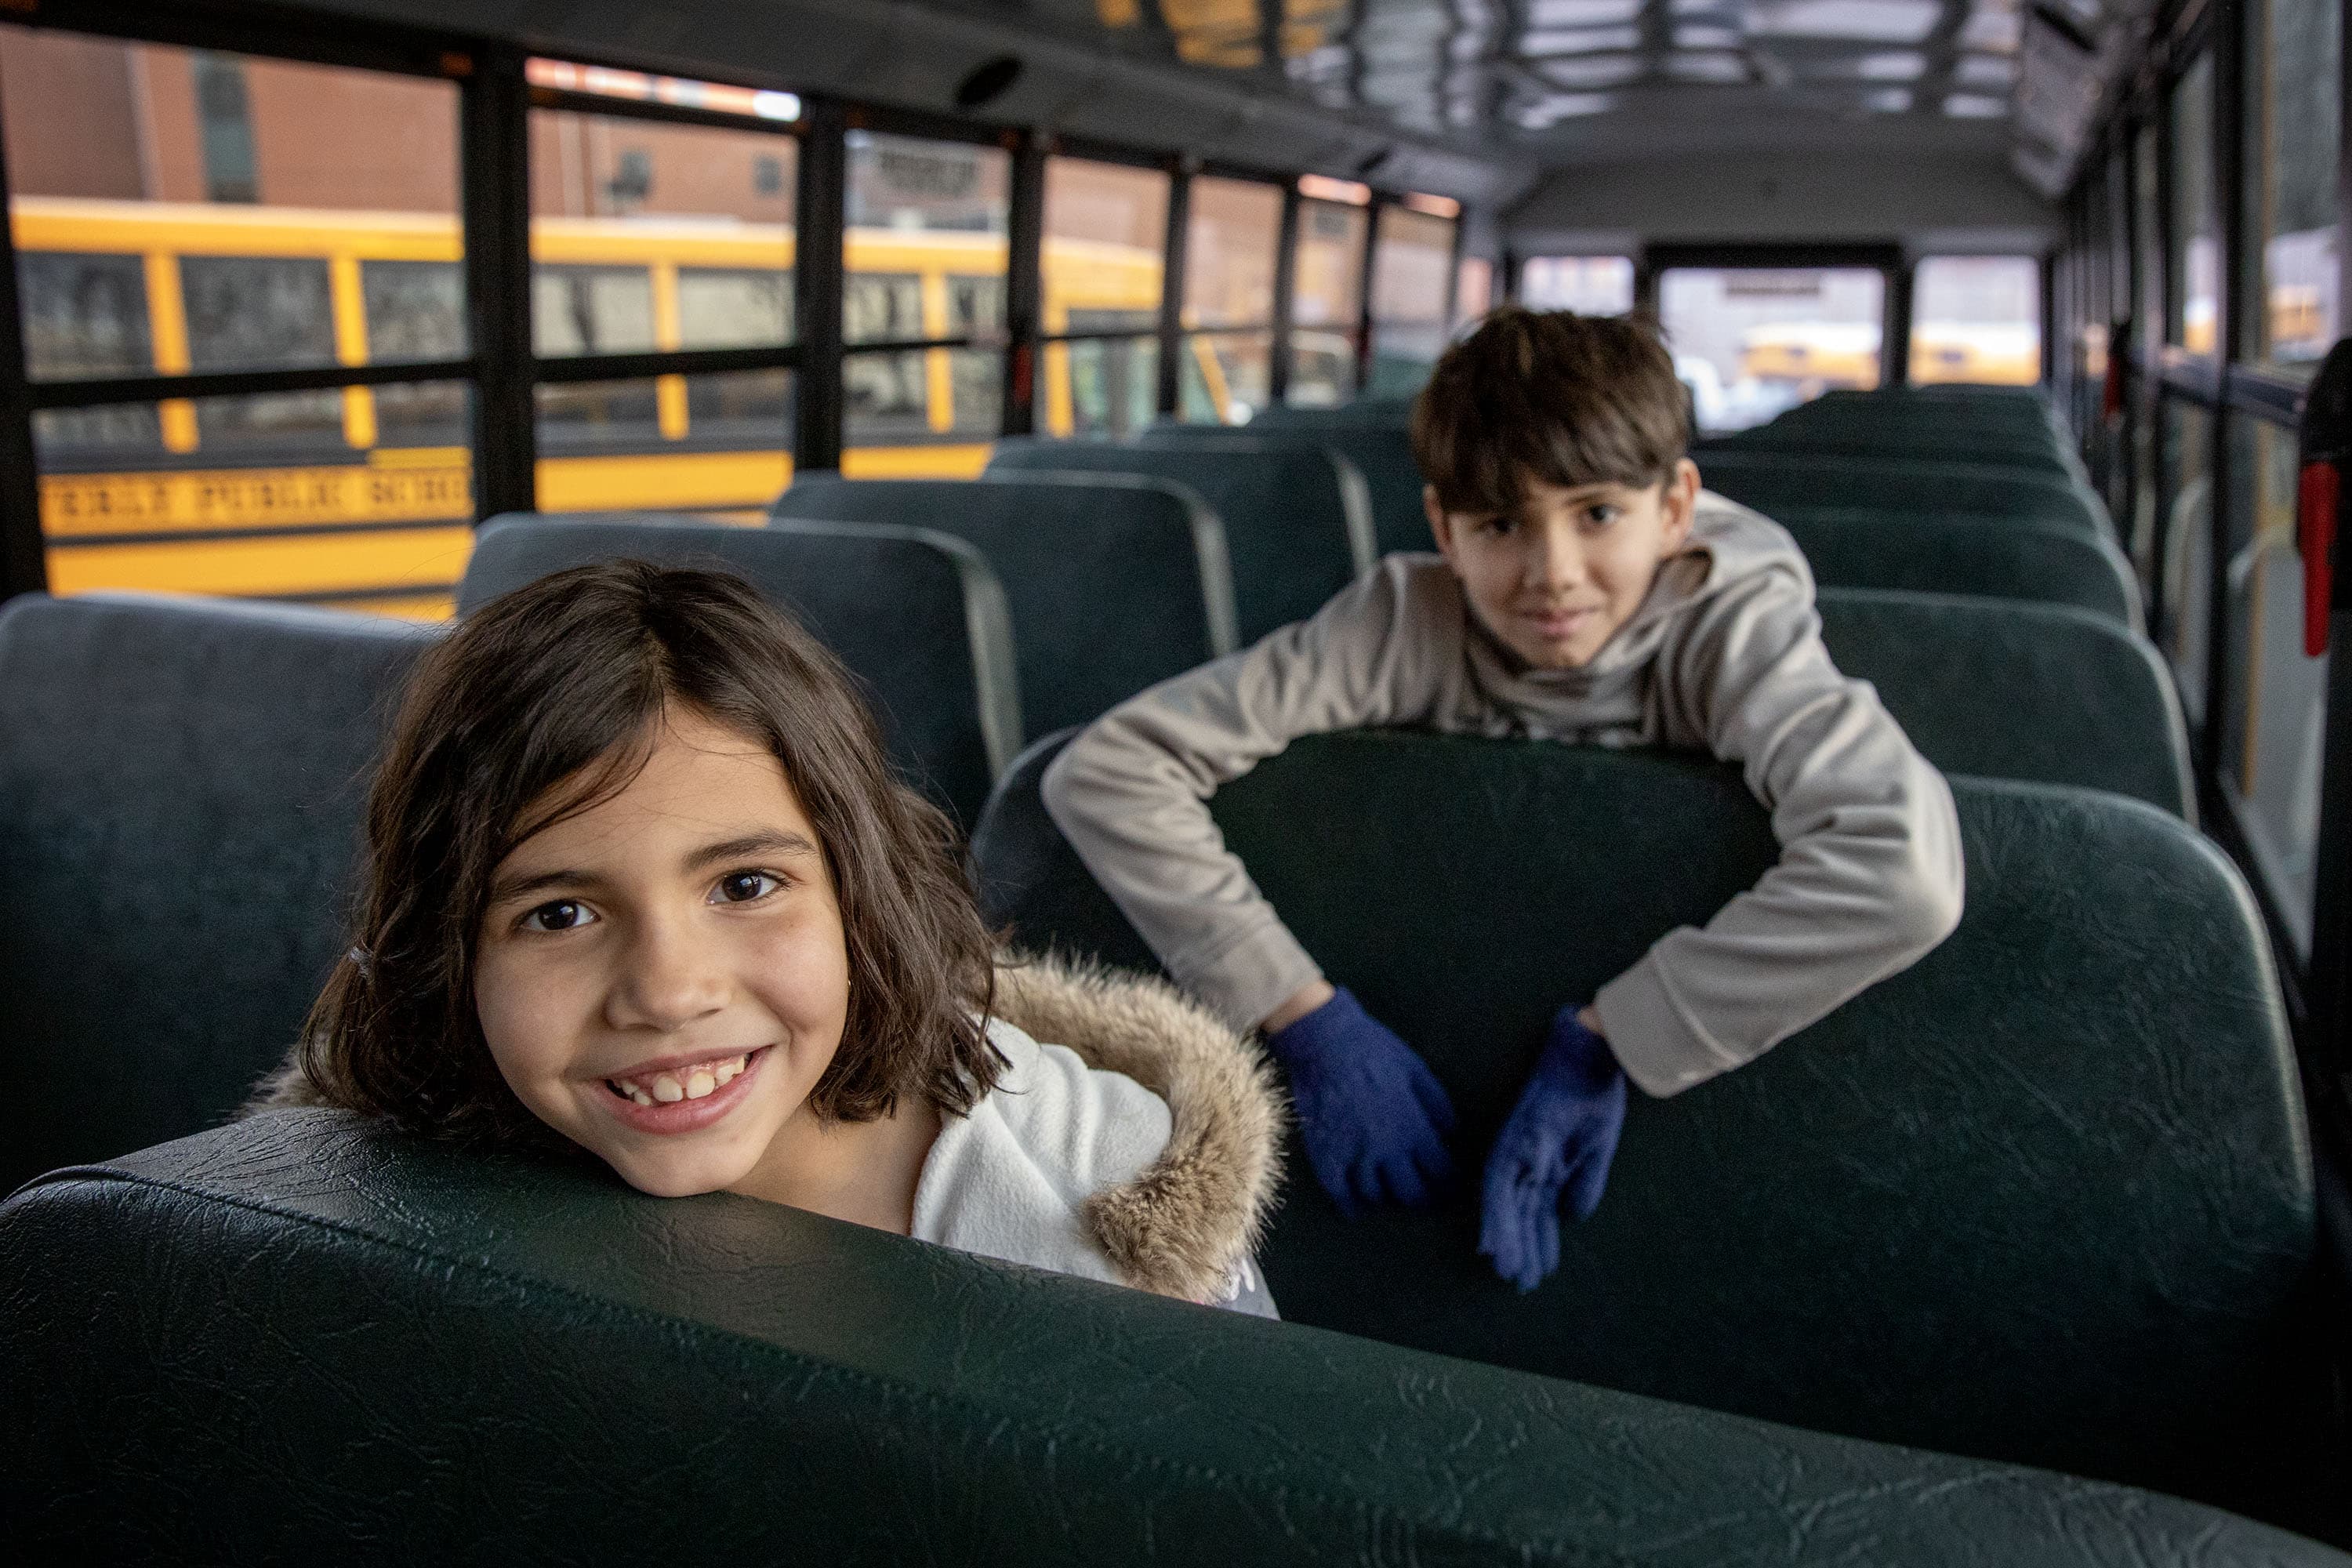 Cove Elementary students Angelina and Kenneth Denis aboard an electric school bus in Beverly, Mass. (Robin Lubbock/WBUR)